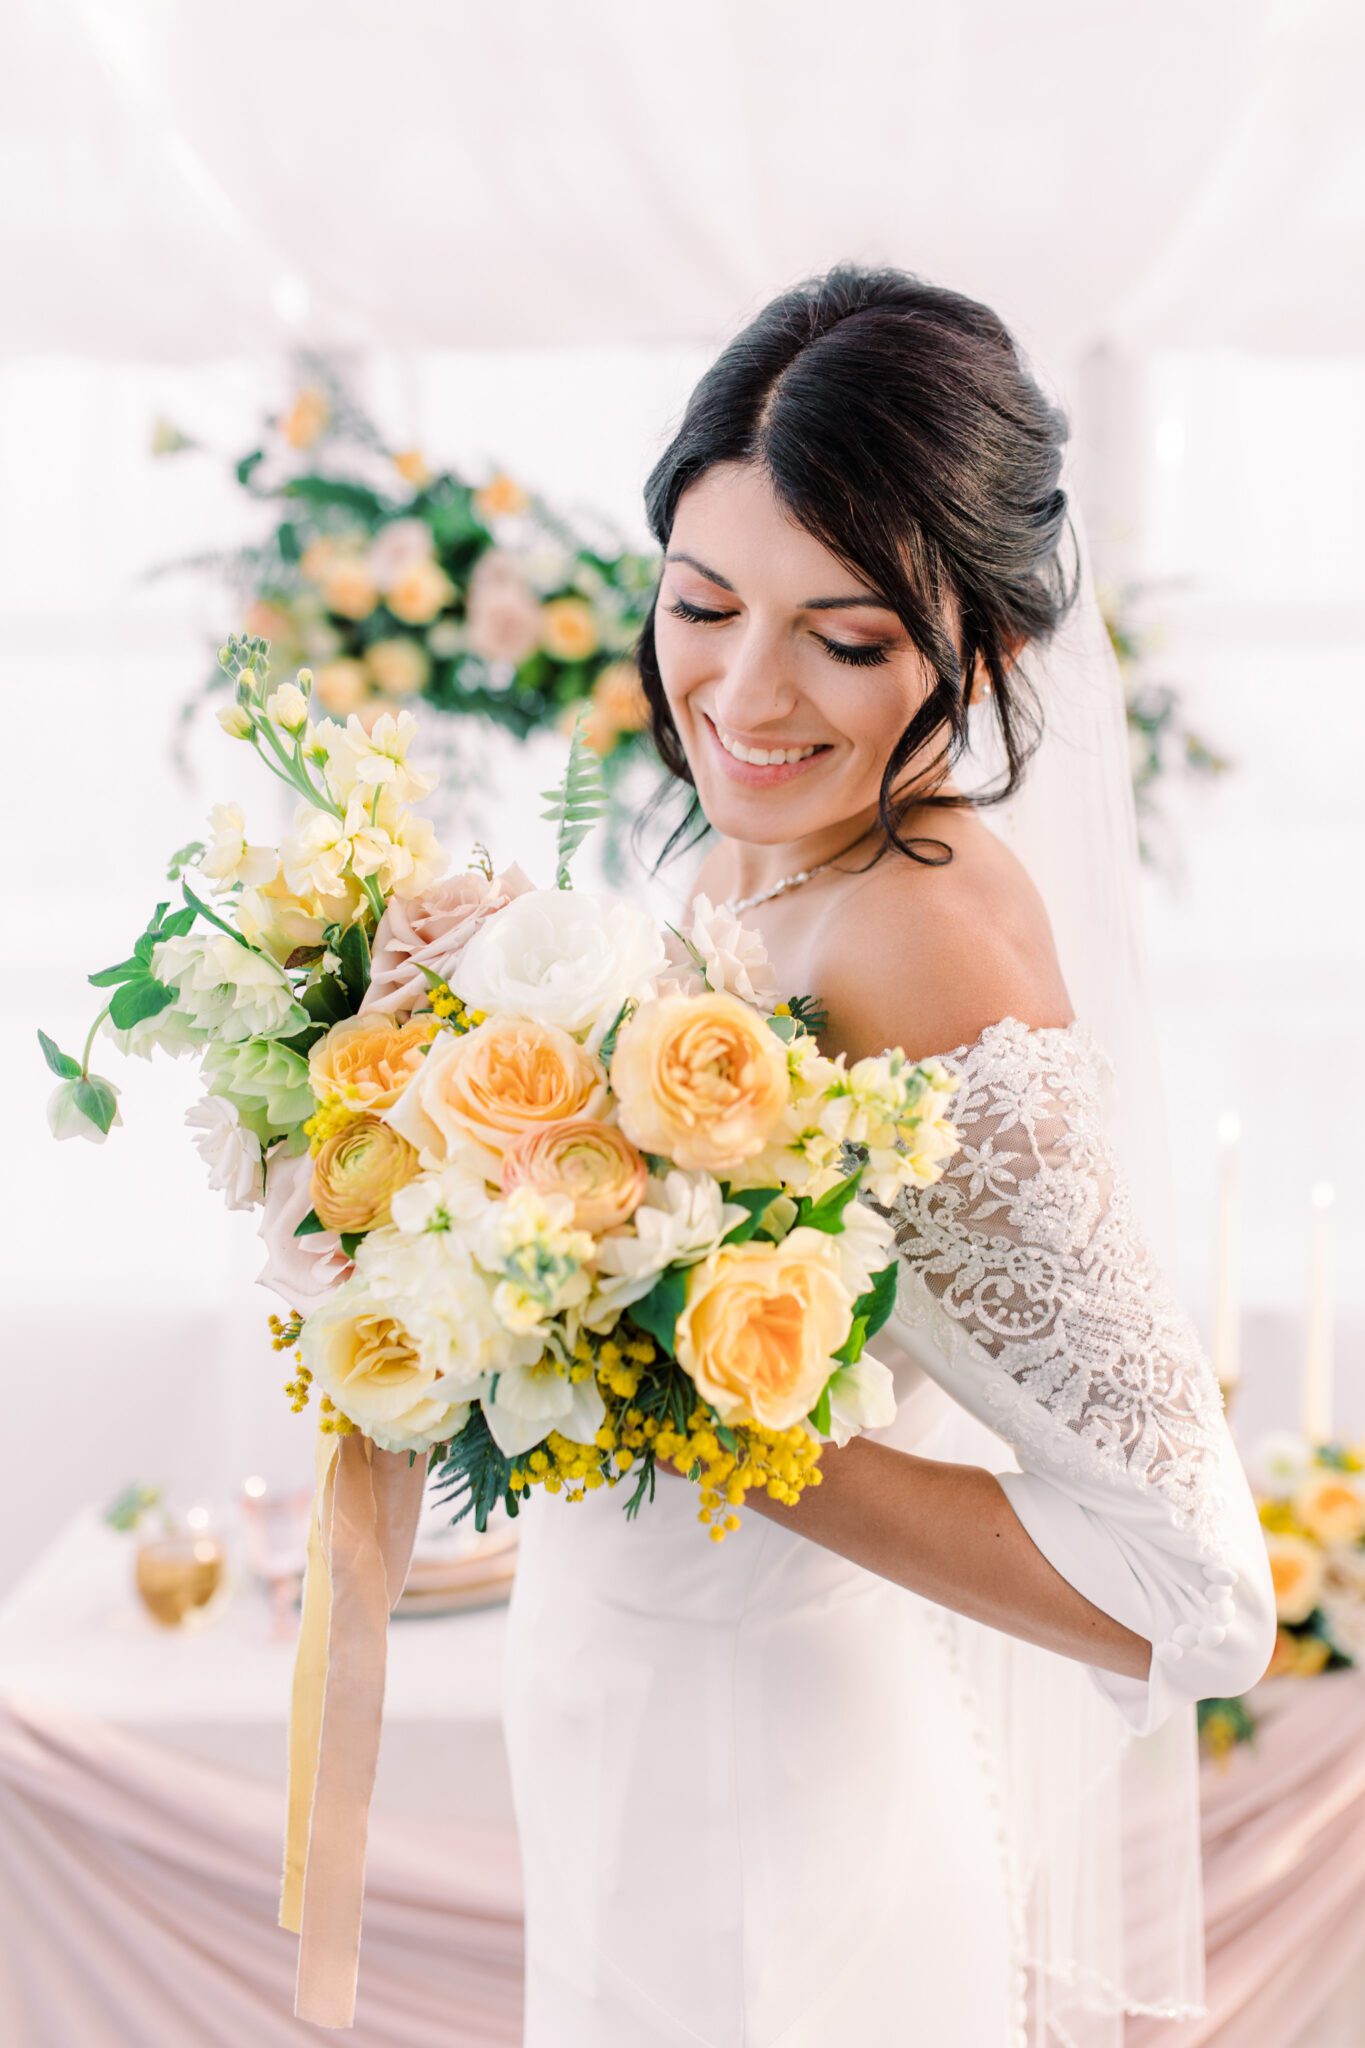 Bride holding yellow and peach bridal bouquet designed by Little Petal Company, wearing off-the-shoulder wedding gown with lace sleeve detail, hair and makeup by Desire at The Headroom